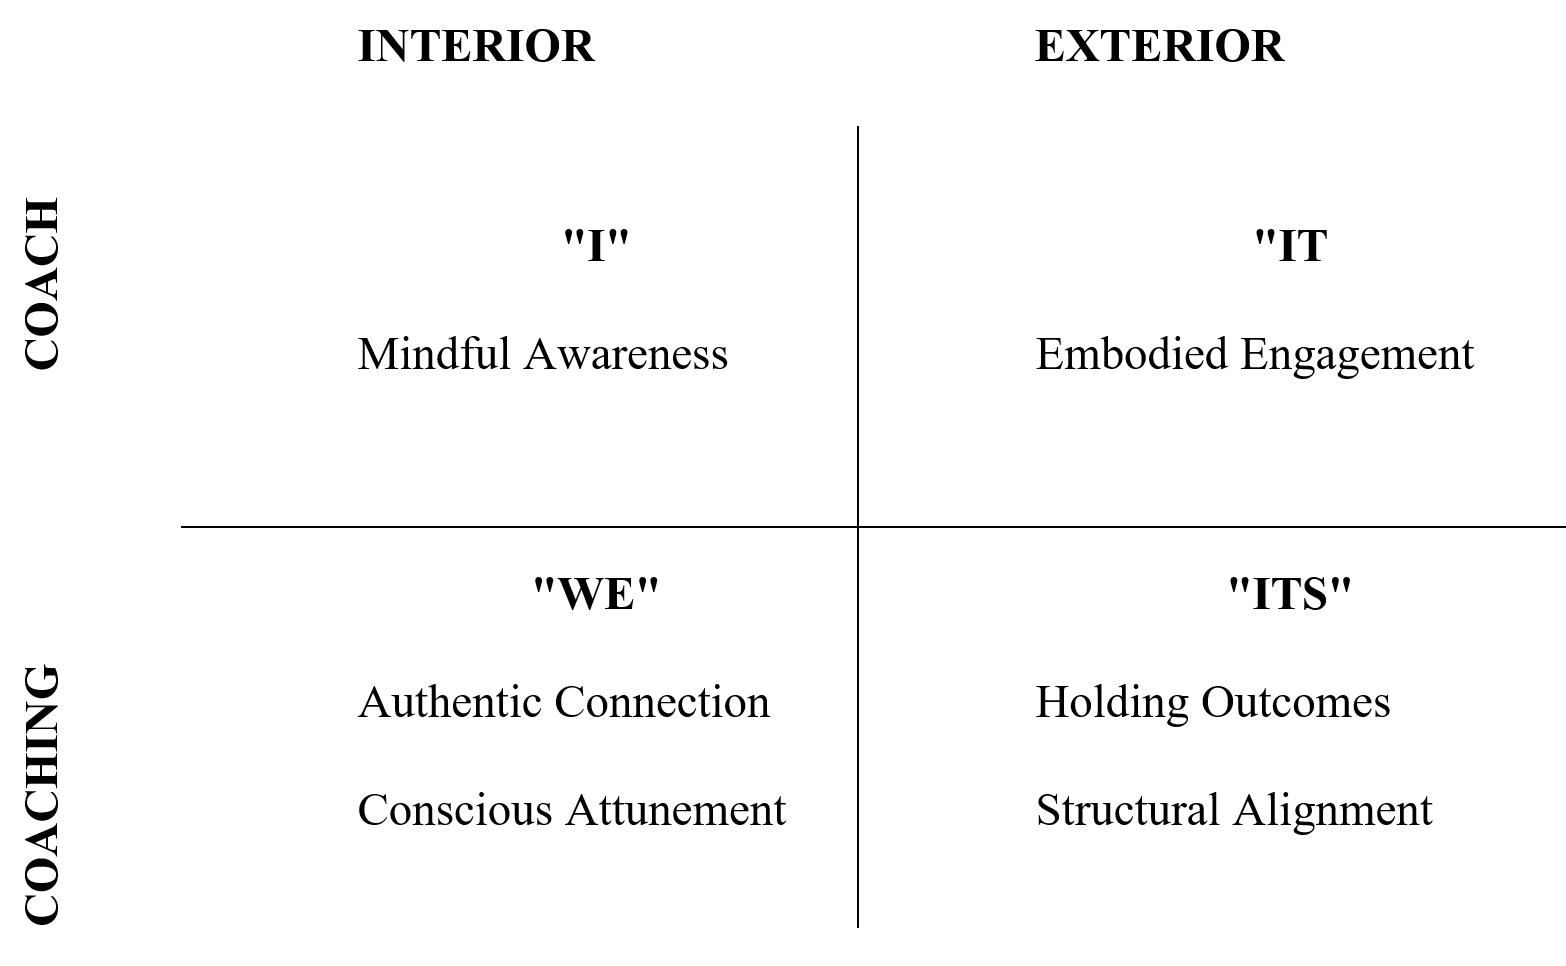 A quadrant perspective of coaching presence based on Wilber’s quadrant model